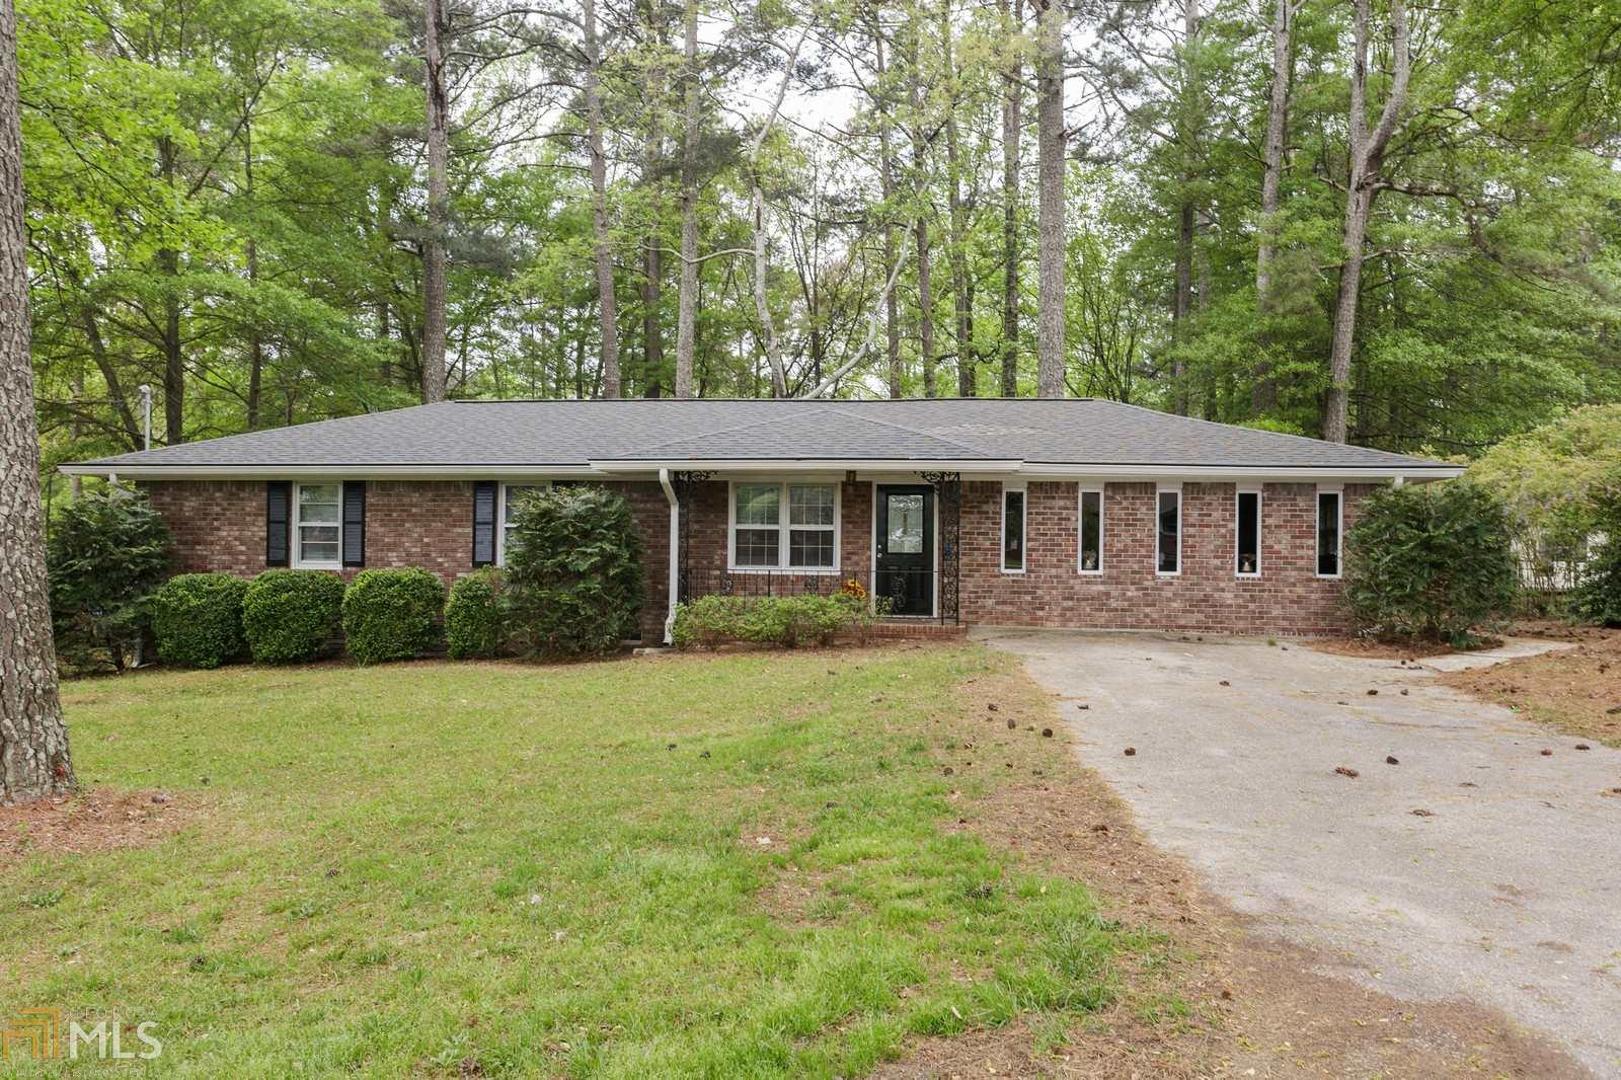 Welcome home to this turn key ready Ranch. Fully renovated- everything has been either repaired or replaced. Ready for you to move in and start your new life!